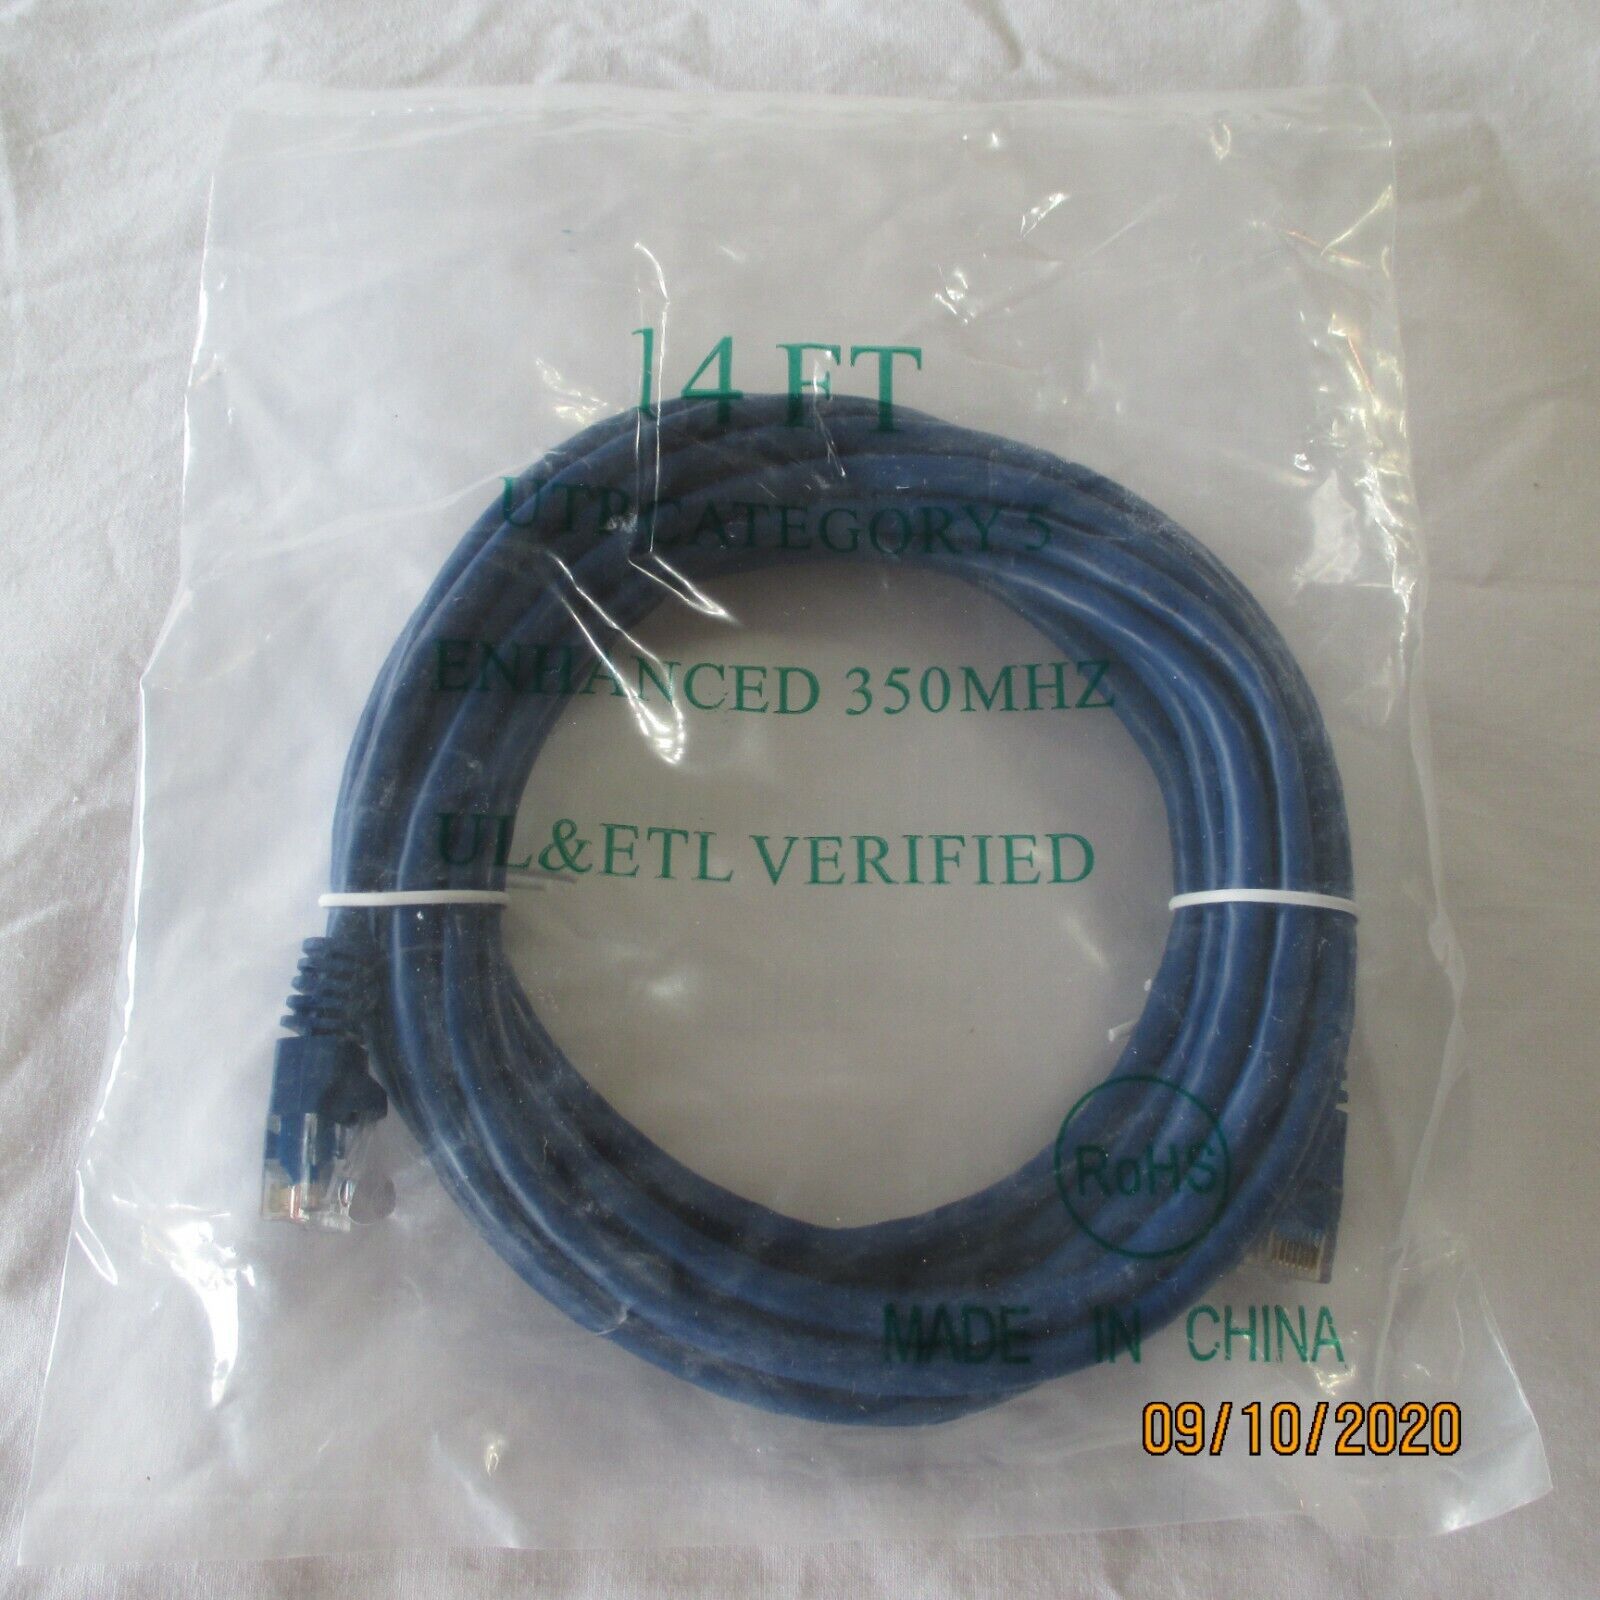 NEW 14 FT UTP Category 5 Enhanced 350 MHZ UL & ETL Verified Cable R0HS Cord New